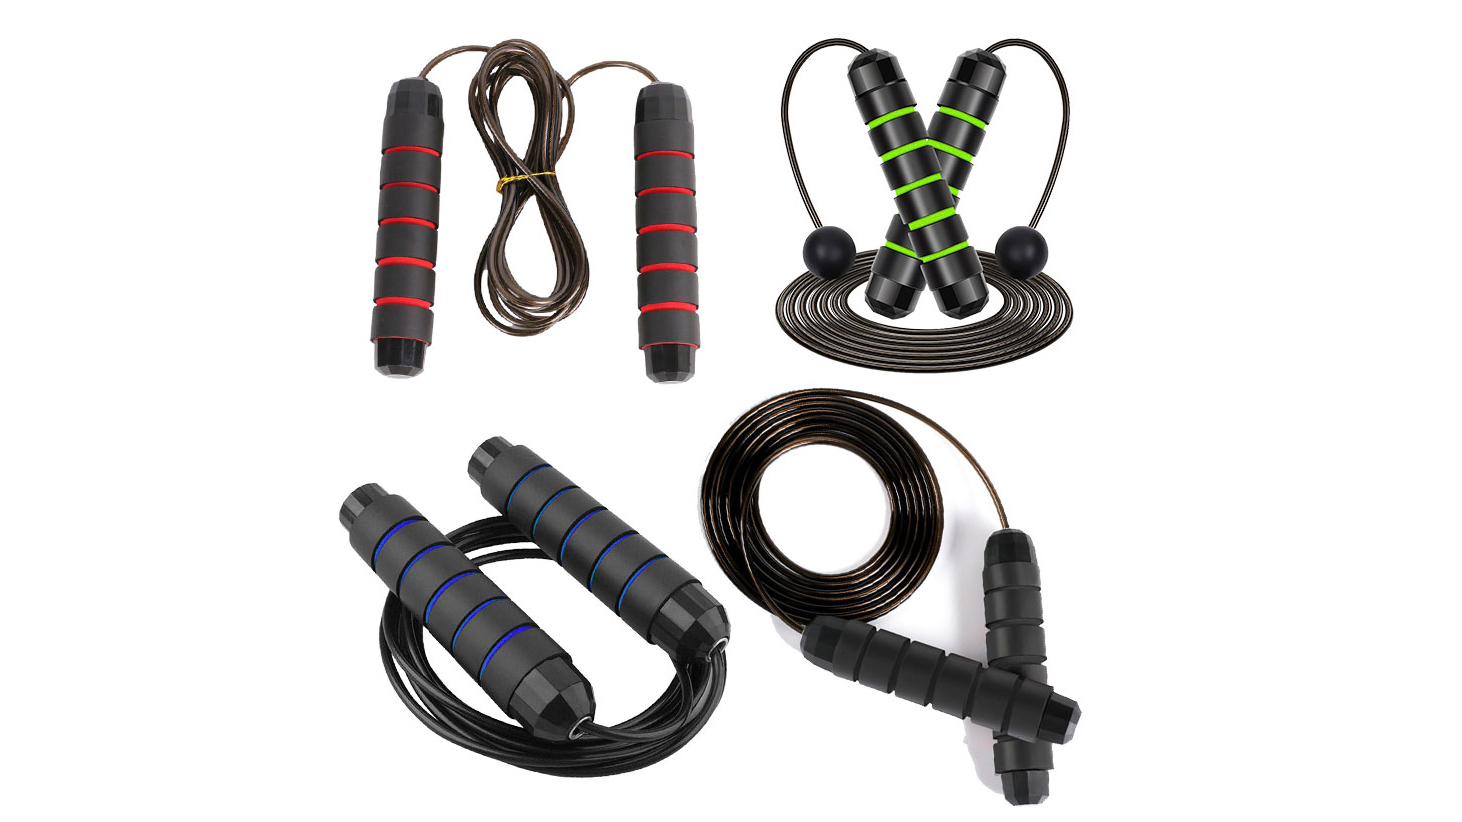 Why choose wire skipping rope?